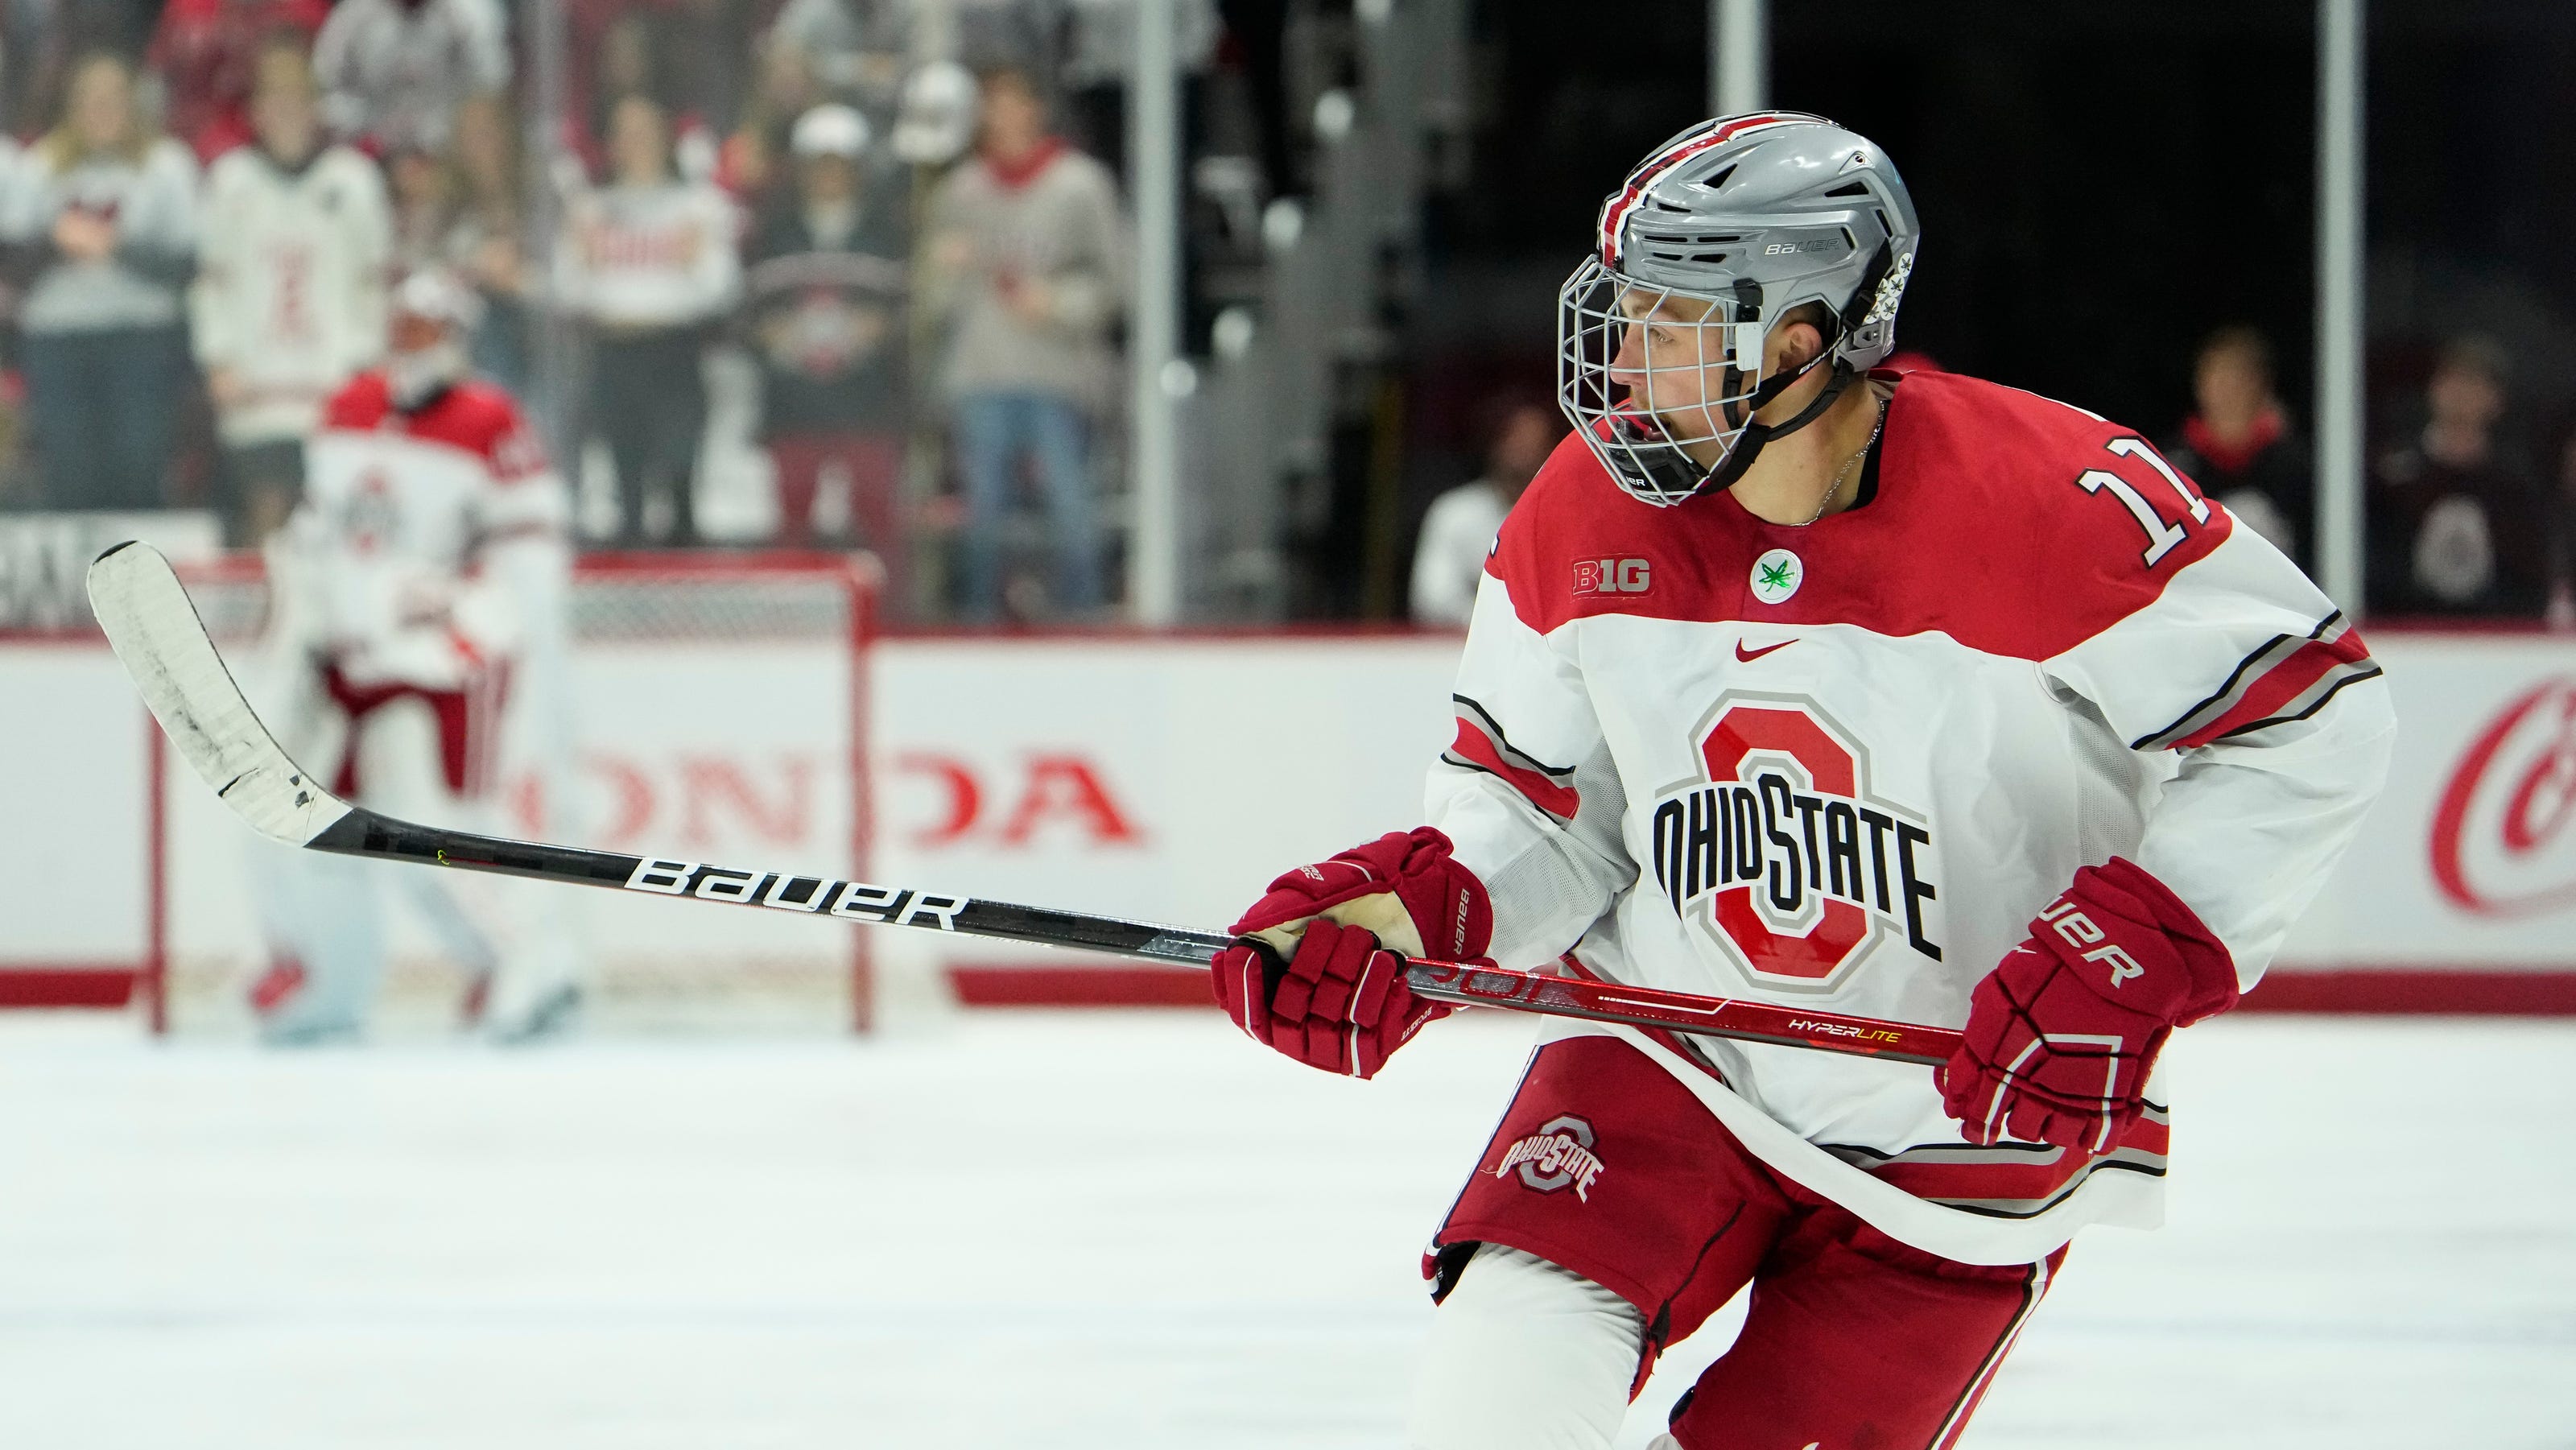  Ohio State apologizes to Michigan State hockey player over racial slur 